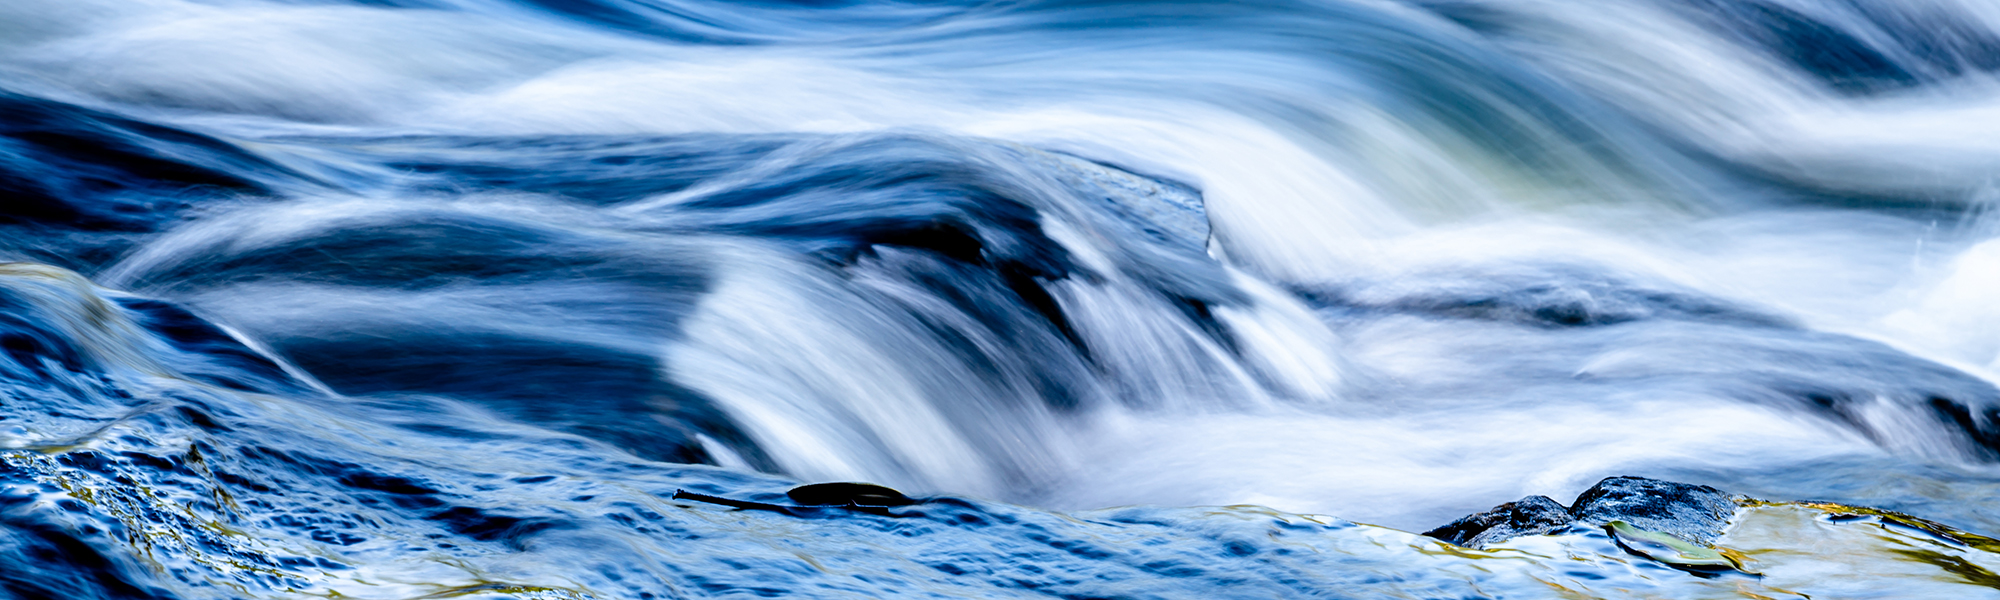 Clear blue water flows over rocks in a long-exposure photograph of a New Zealand river.